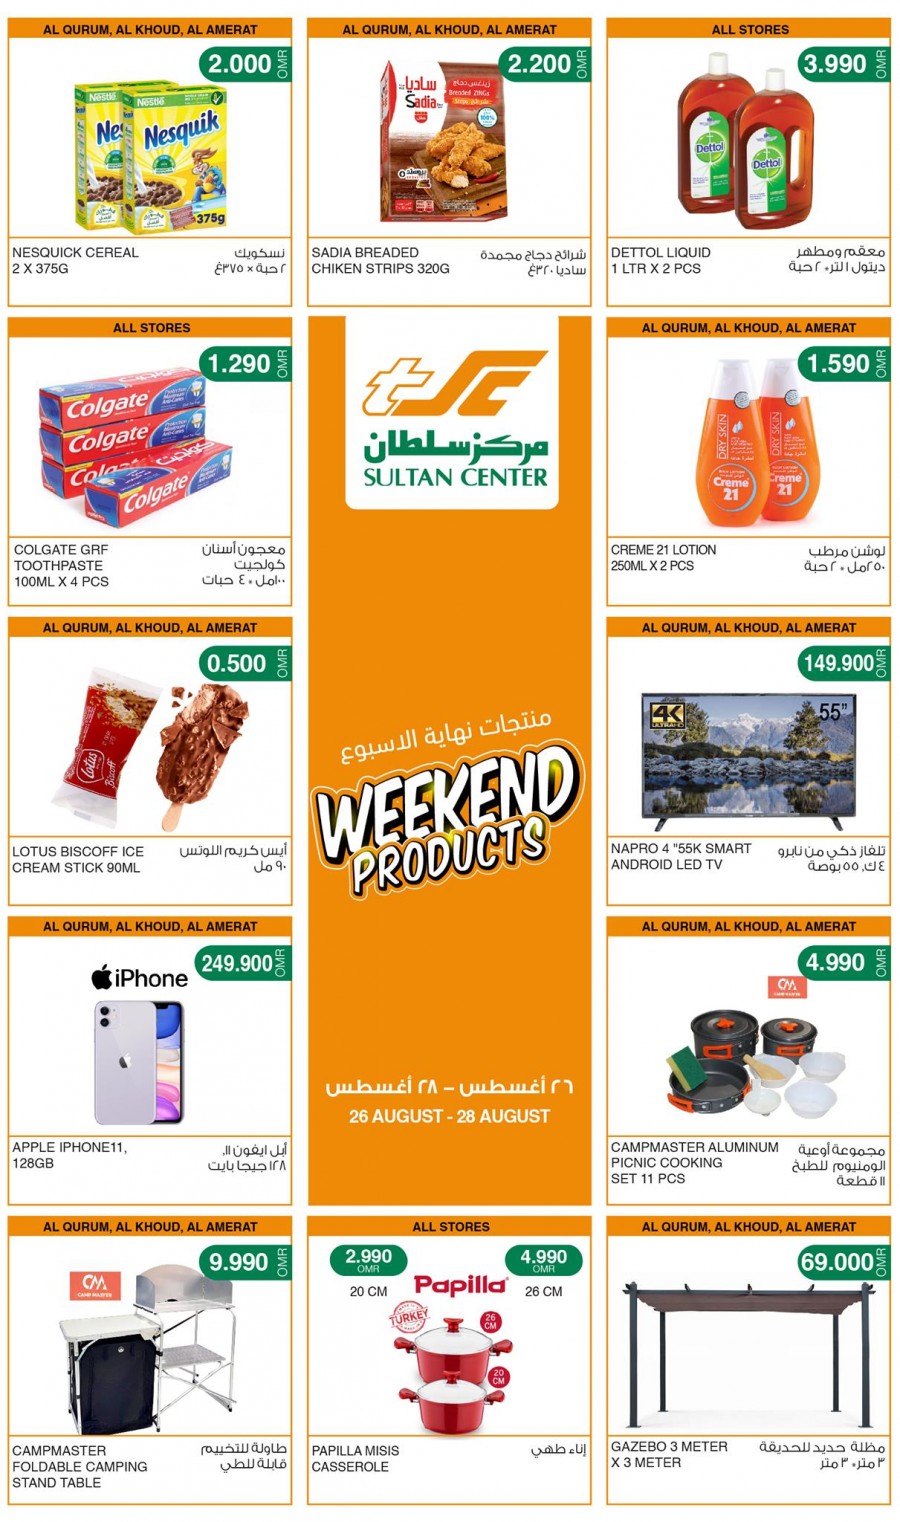 Sultan Center Weekend Products